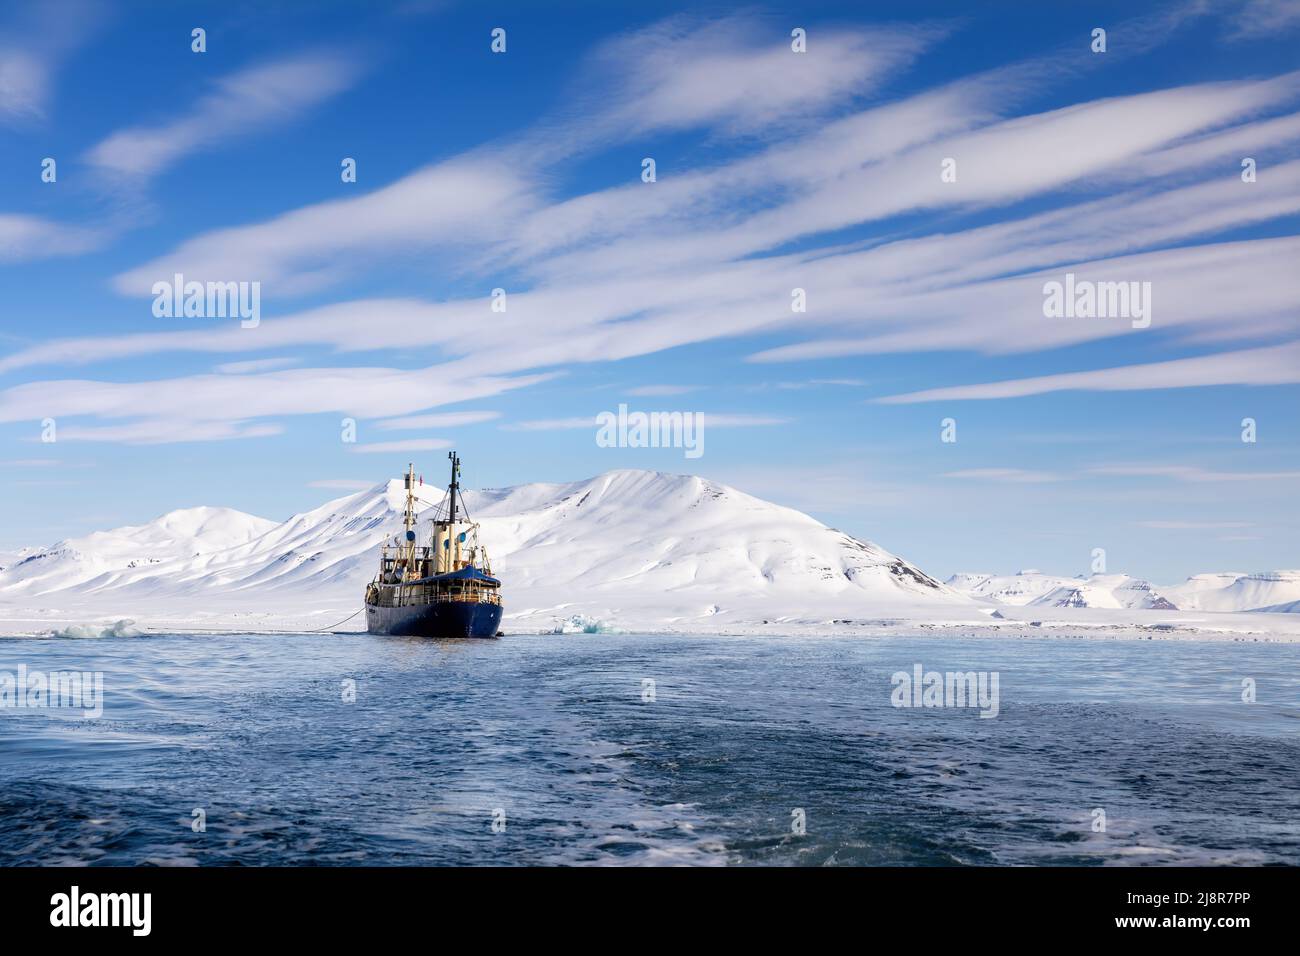 Icebreaker at anchor in the arctic waters of Svalbard, a Norwegian archipelago between mainland Norway and the North Pole. Crisp blue sky and snowy mo Stock Photo